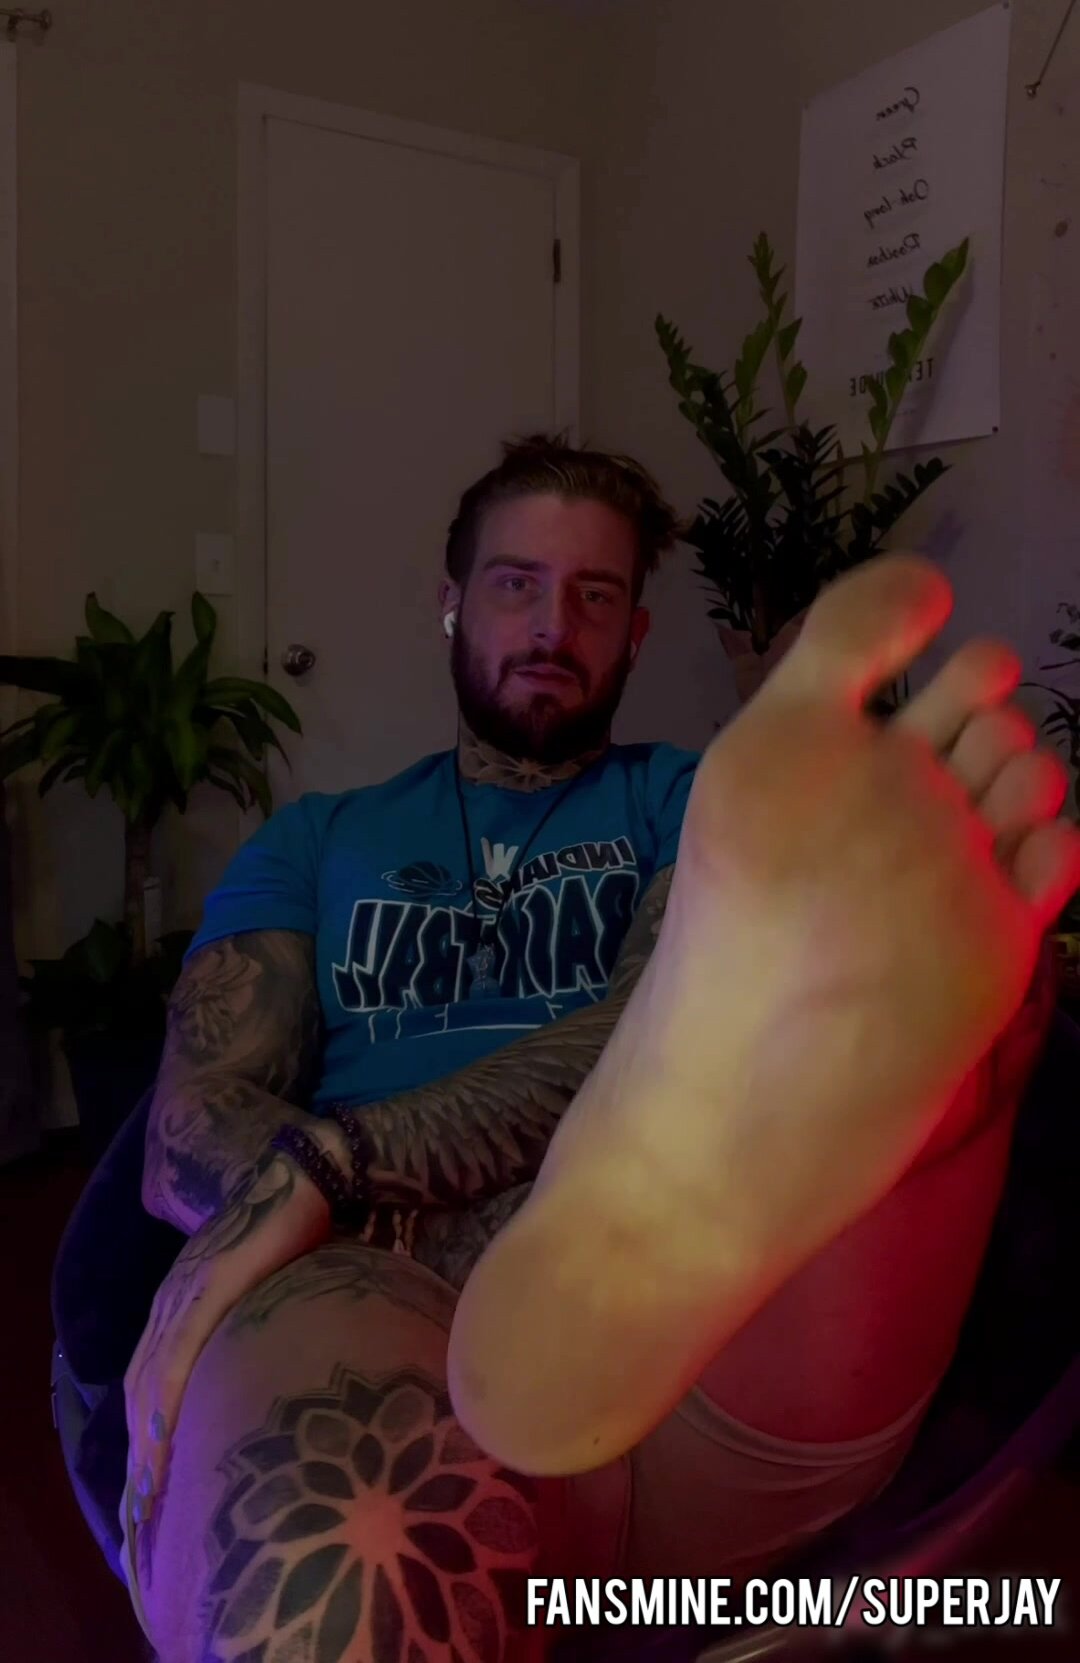 POV: YOU'RE ABOUT TO LICK HIS DIRTY FEET